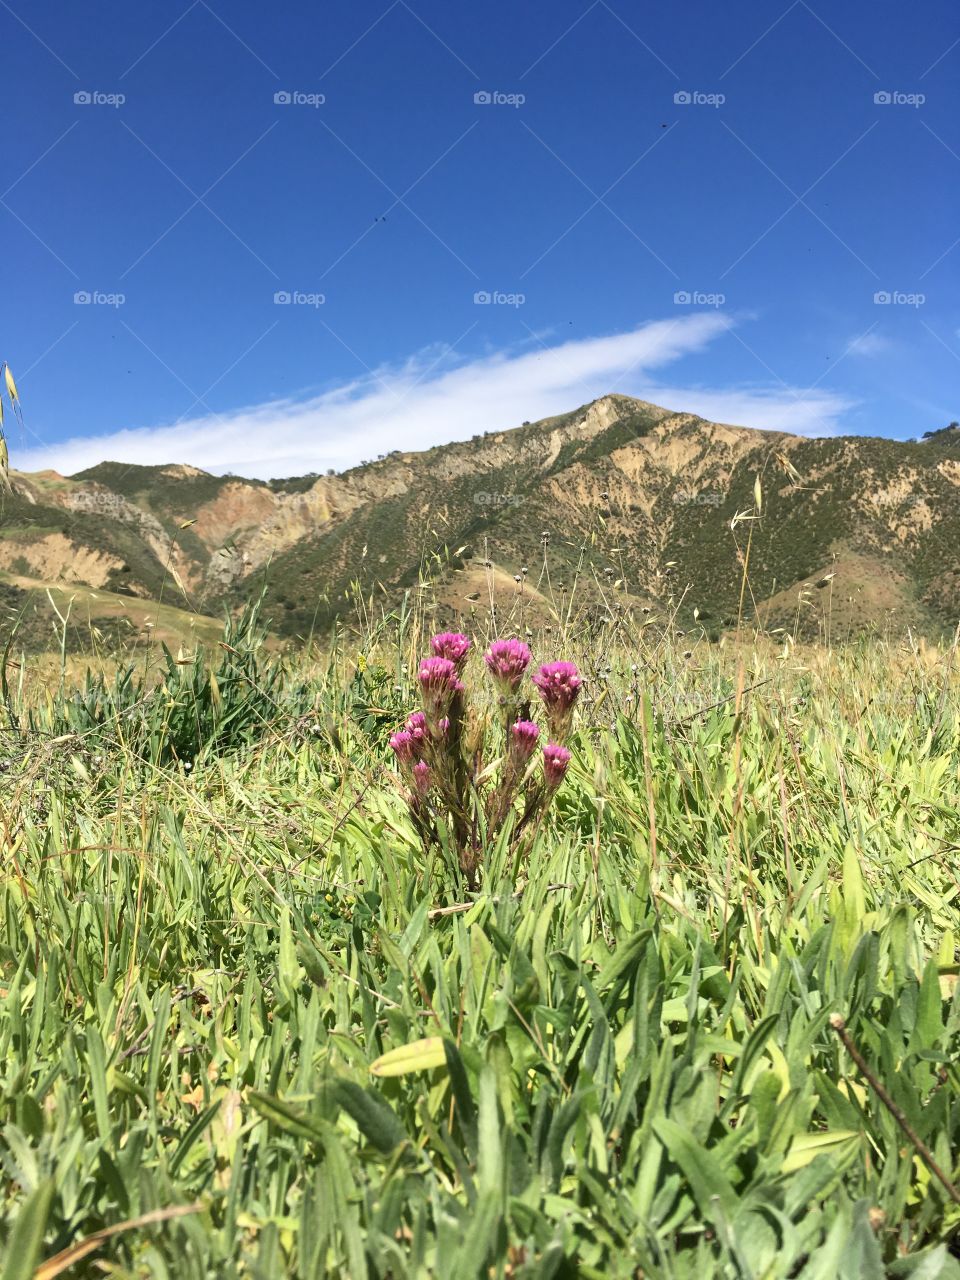 Thistle growing in a field with mountains and blue sky